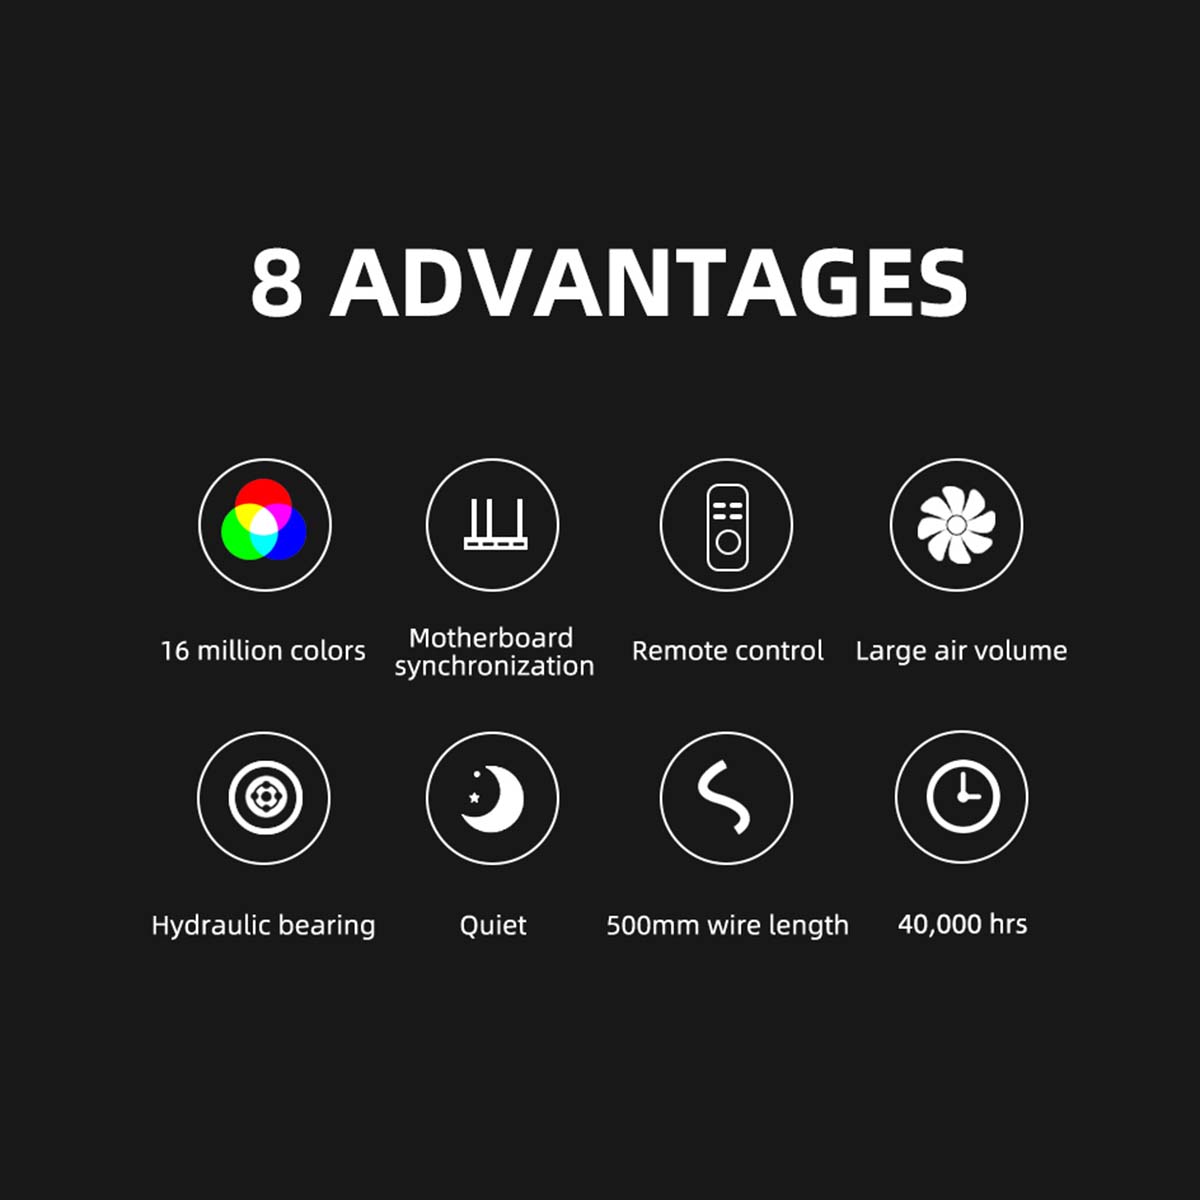 Find COOLMOON 120mm Cooling Fan RGB 6PIN Computer Case Colorful Radiator Cooler PC 5V DC for Sale on Gipsybee.com with cryptocurrencies